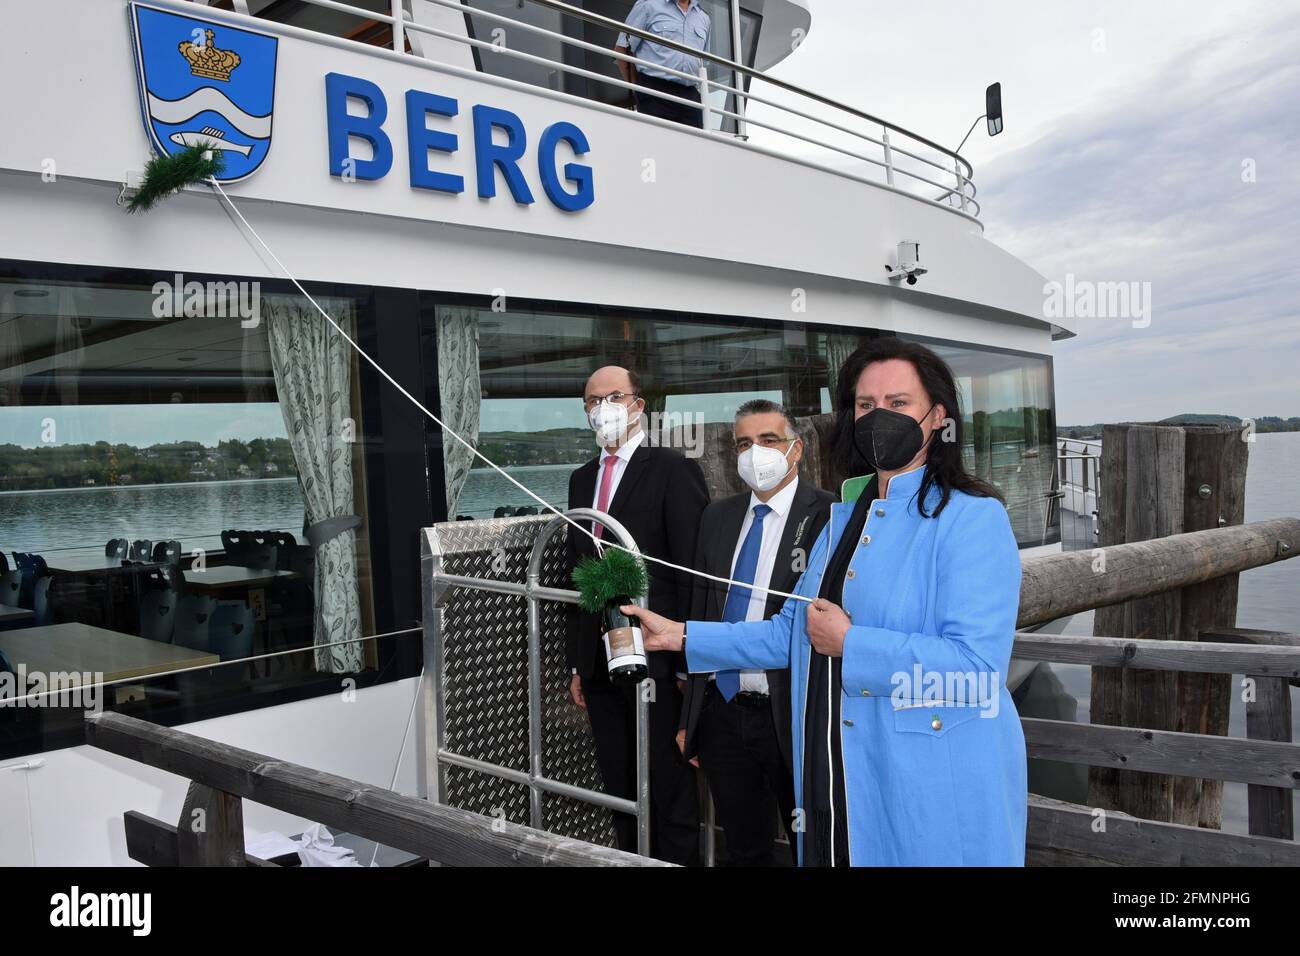 Berg, Germany. 11th May, 2021. Bavarian Finance and Home Affairs Minister Albert Füracker (CSU, l-r), Michael Grießer, Managing Director of Bayerische Seenschifffahrt GmbH, and godmother Ute Eiling-Hütig (CSU) christen the new electric motor ship 'Berg' on Lake Starnberg. The ship holds 300 passengers and, at 35 m long, is the largest fully electric ship on an inland lake in Germany. The ship will be used on the Starnberger Lake. Credit: Ursula Düren/dpa/Alamy Live News Stock Photo